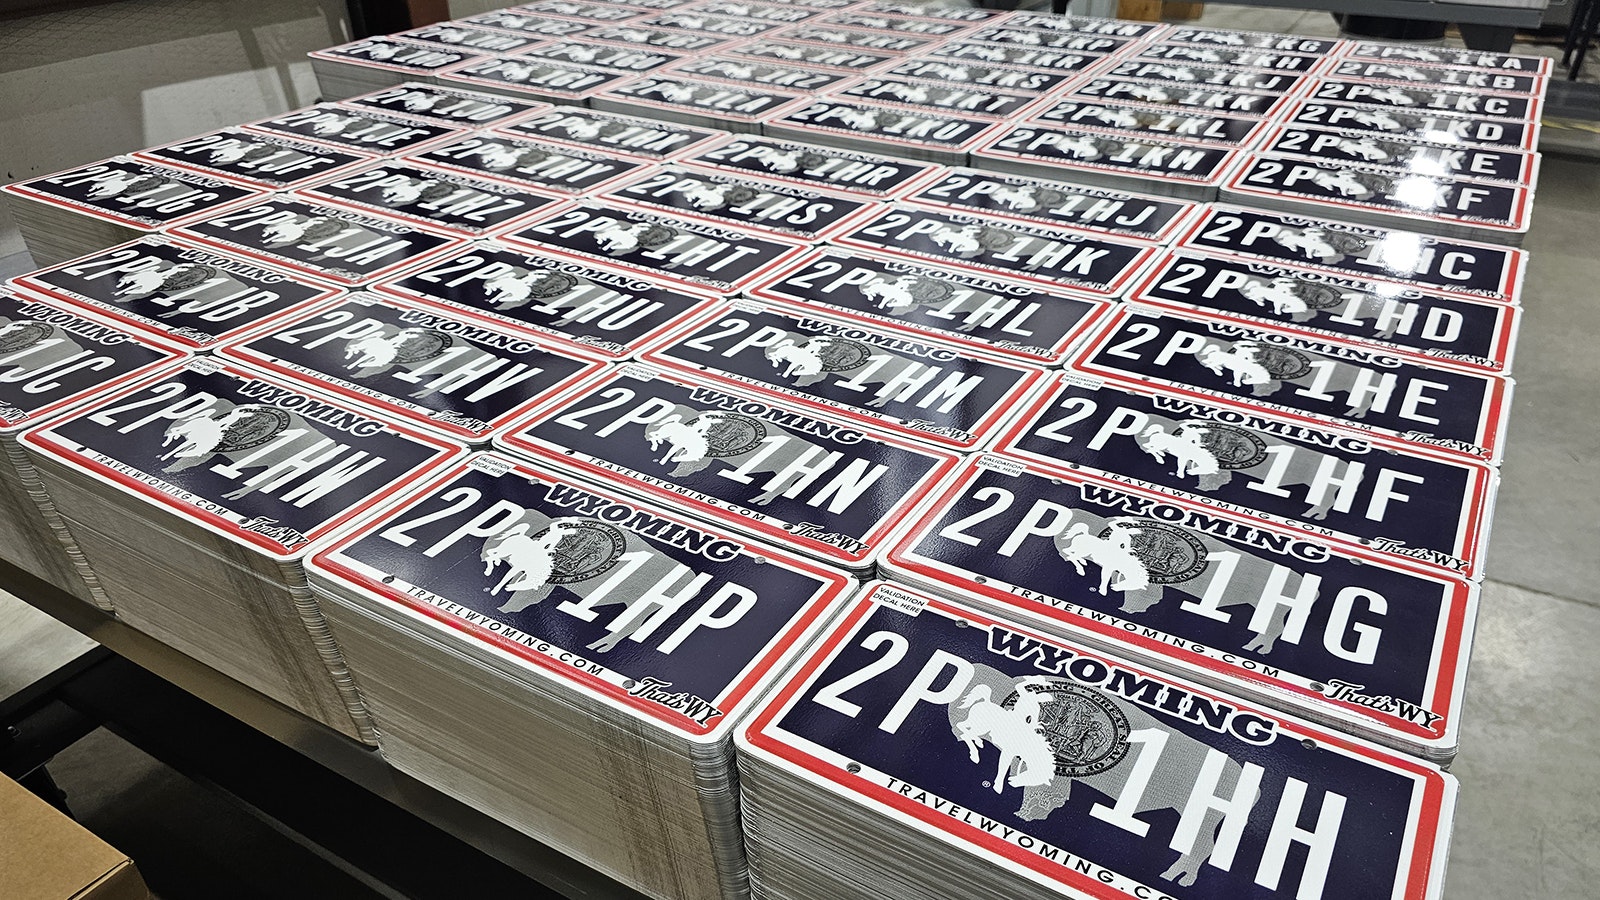 In a secret Cheyenne warehouse dubbed "Area 51," thousands of Wyoming's new license plates are being made.